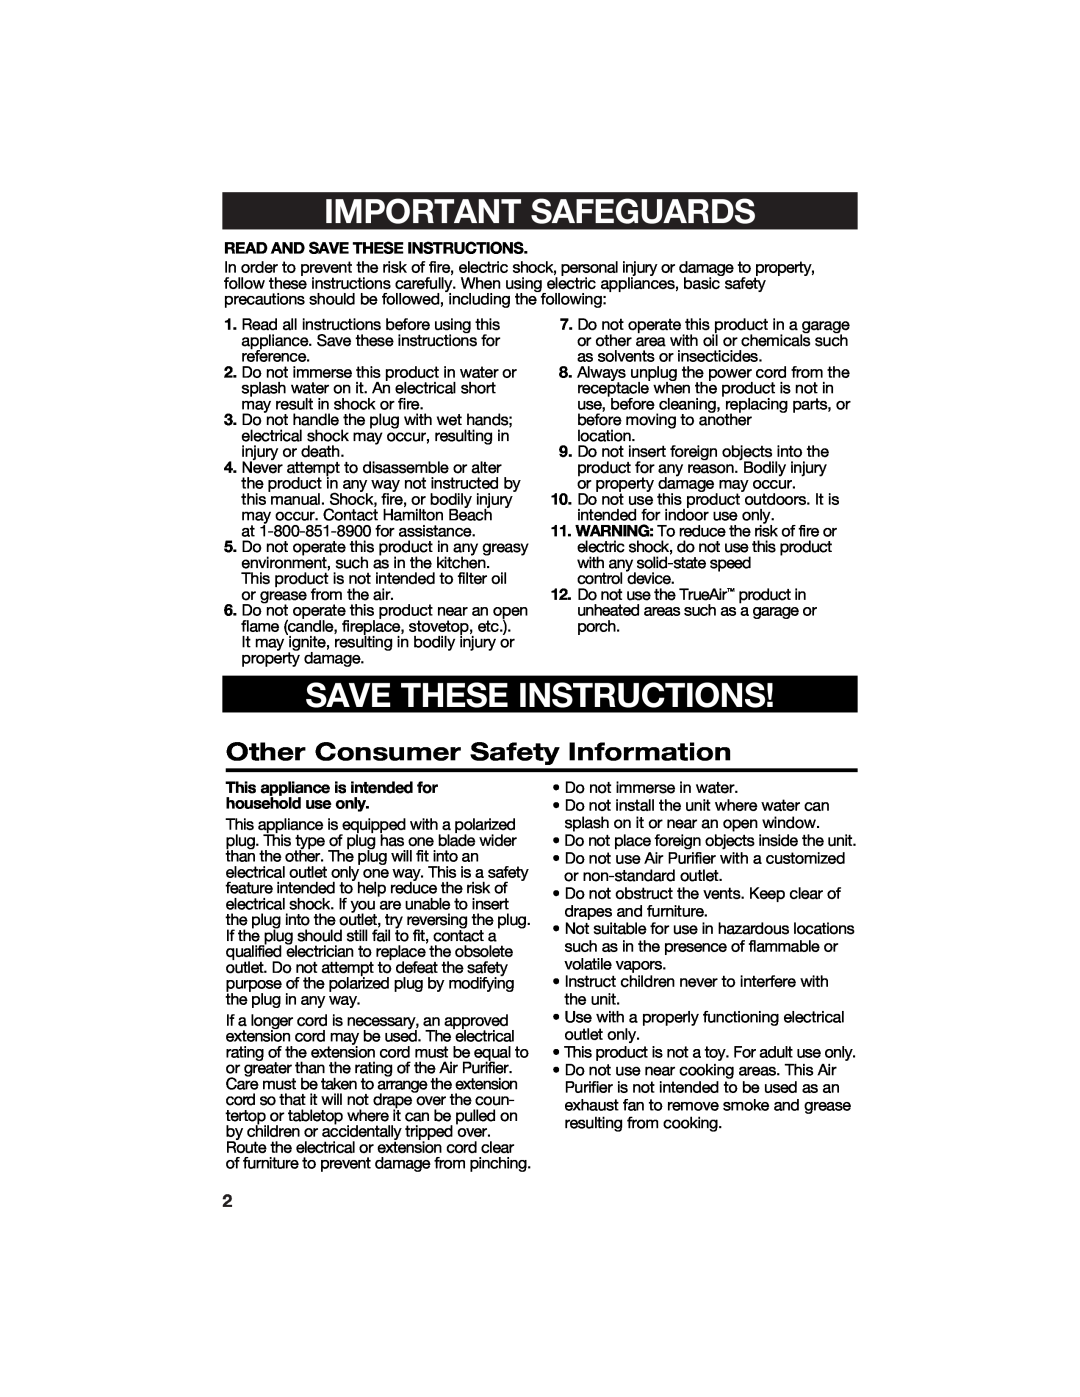 Hamilton Beach 840133100 manual Other Consumer Safety Information, Important Safeguards, Save These Instructions 